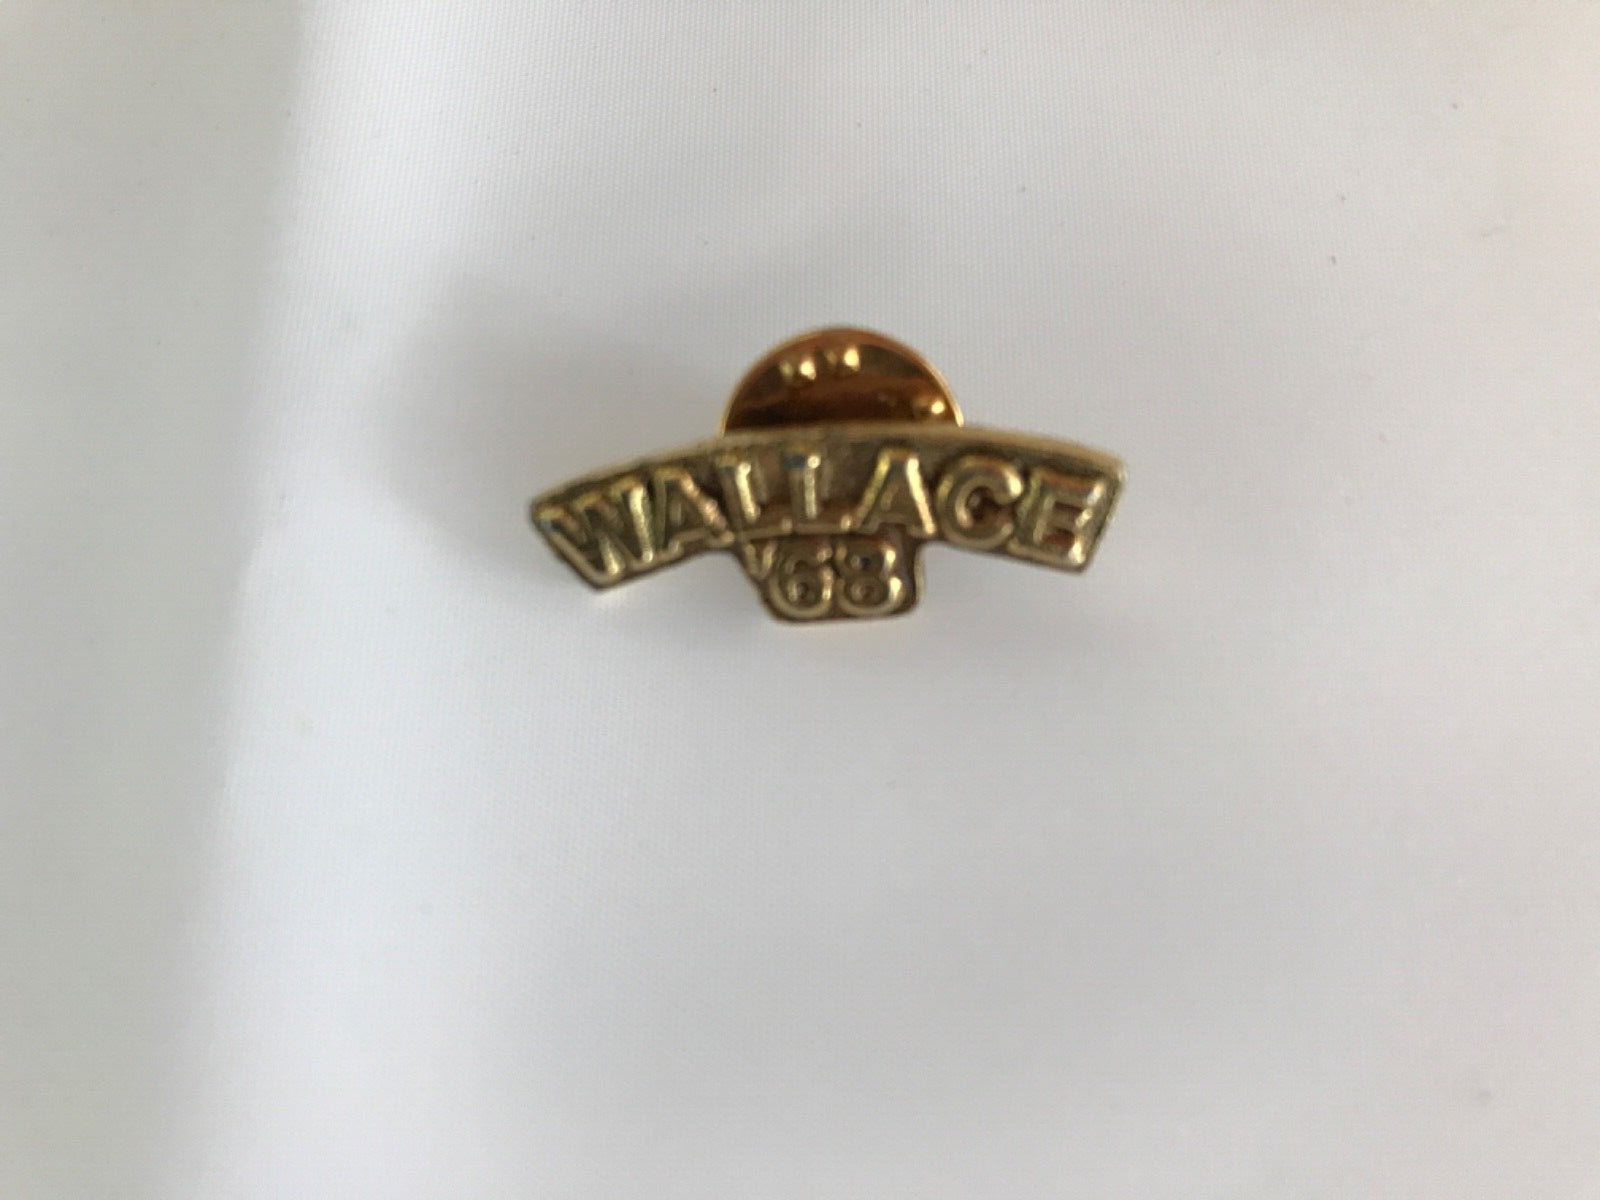 VINTAGE GEORGE WALLACE PRESIDENTIAL CAMPAIGN PIN BACK, PIN 1968, GOLD TONE METAL